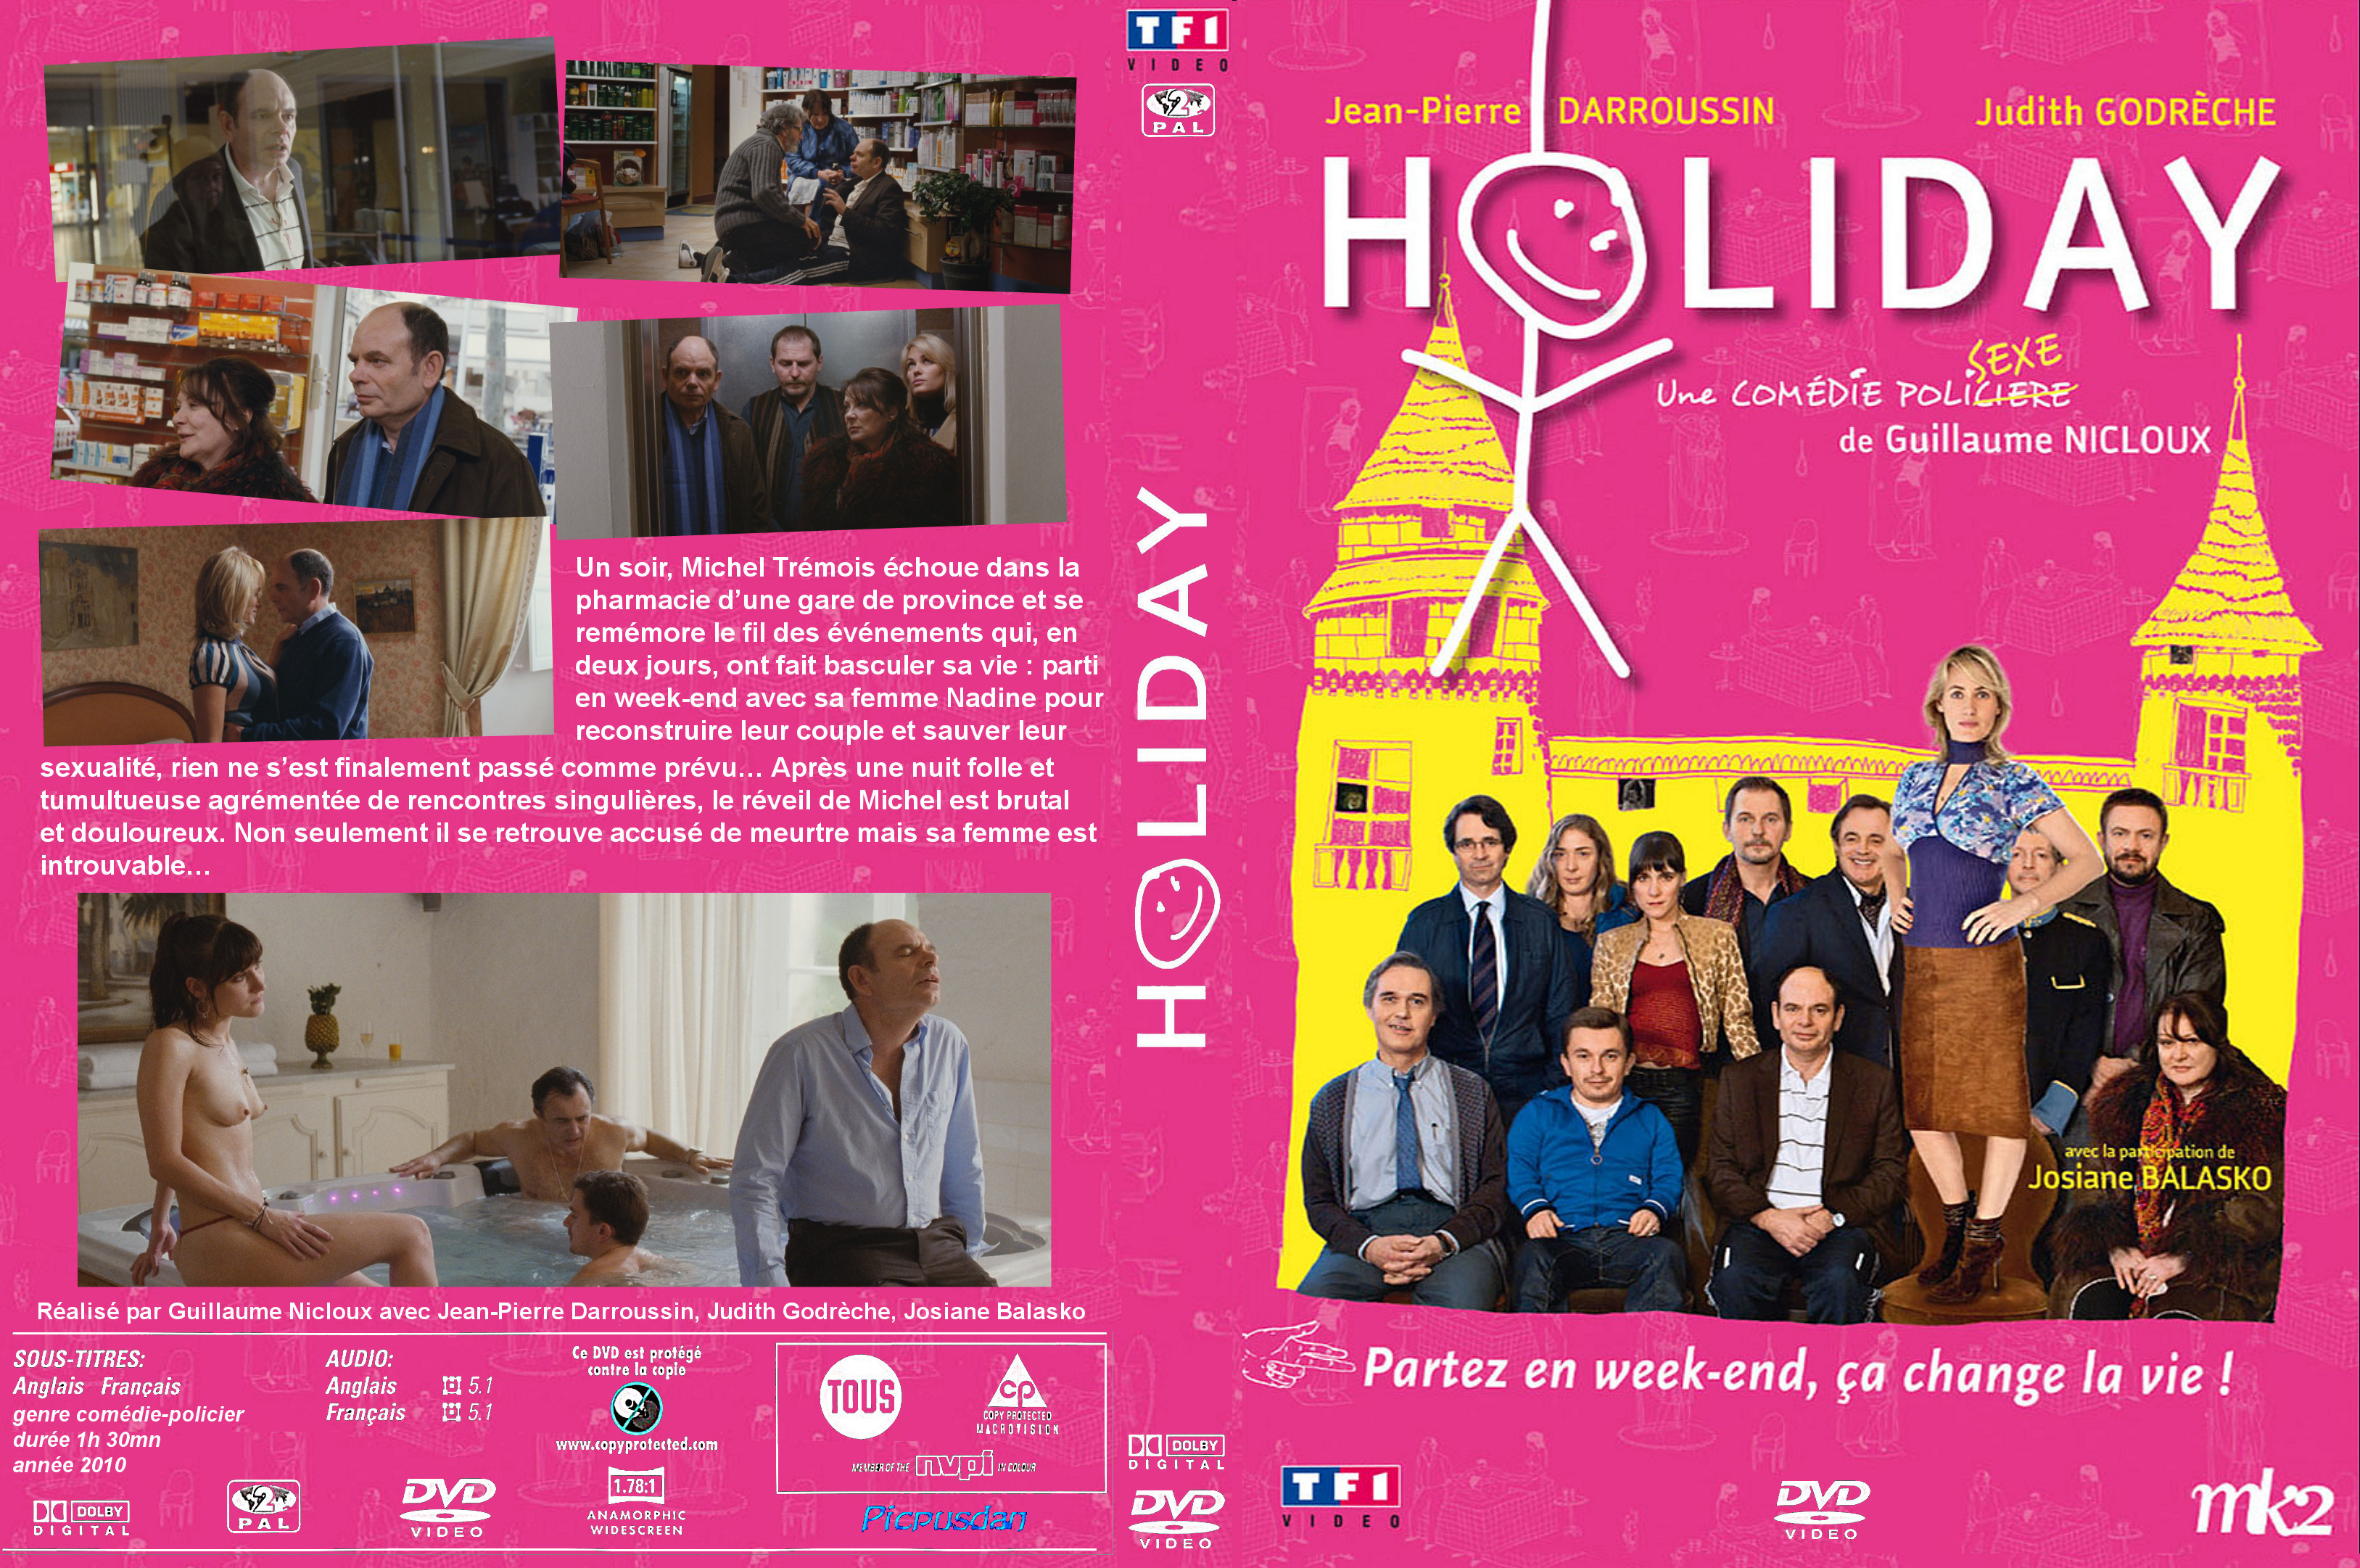 Jaquette DVD Holiday custom